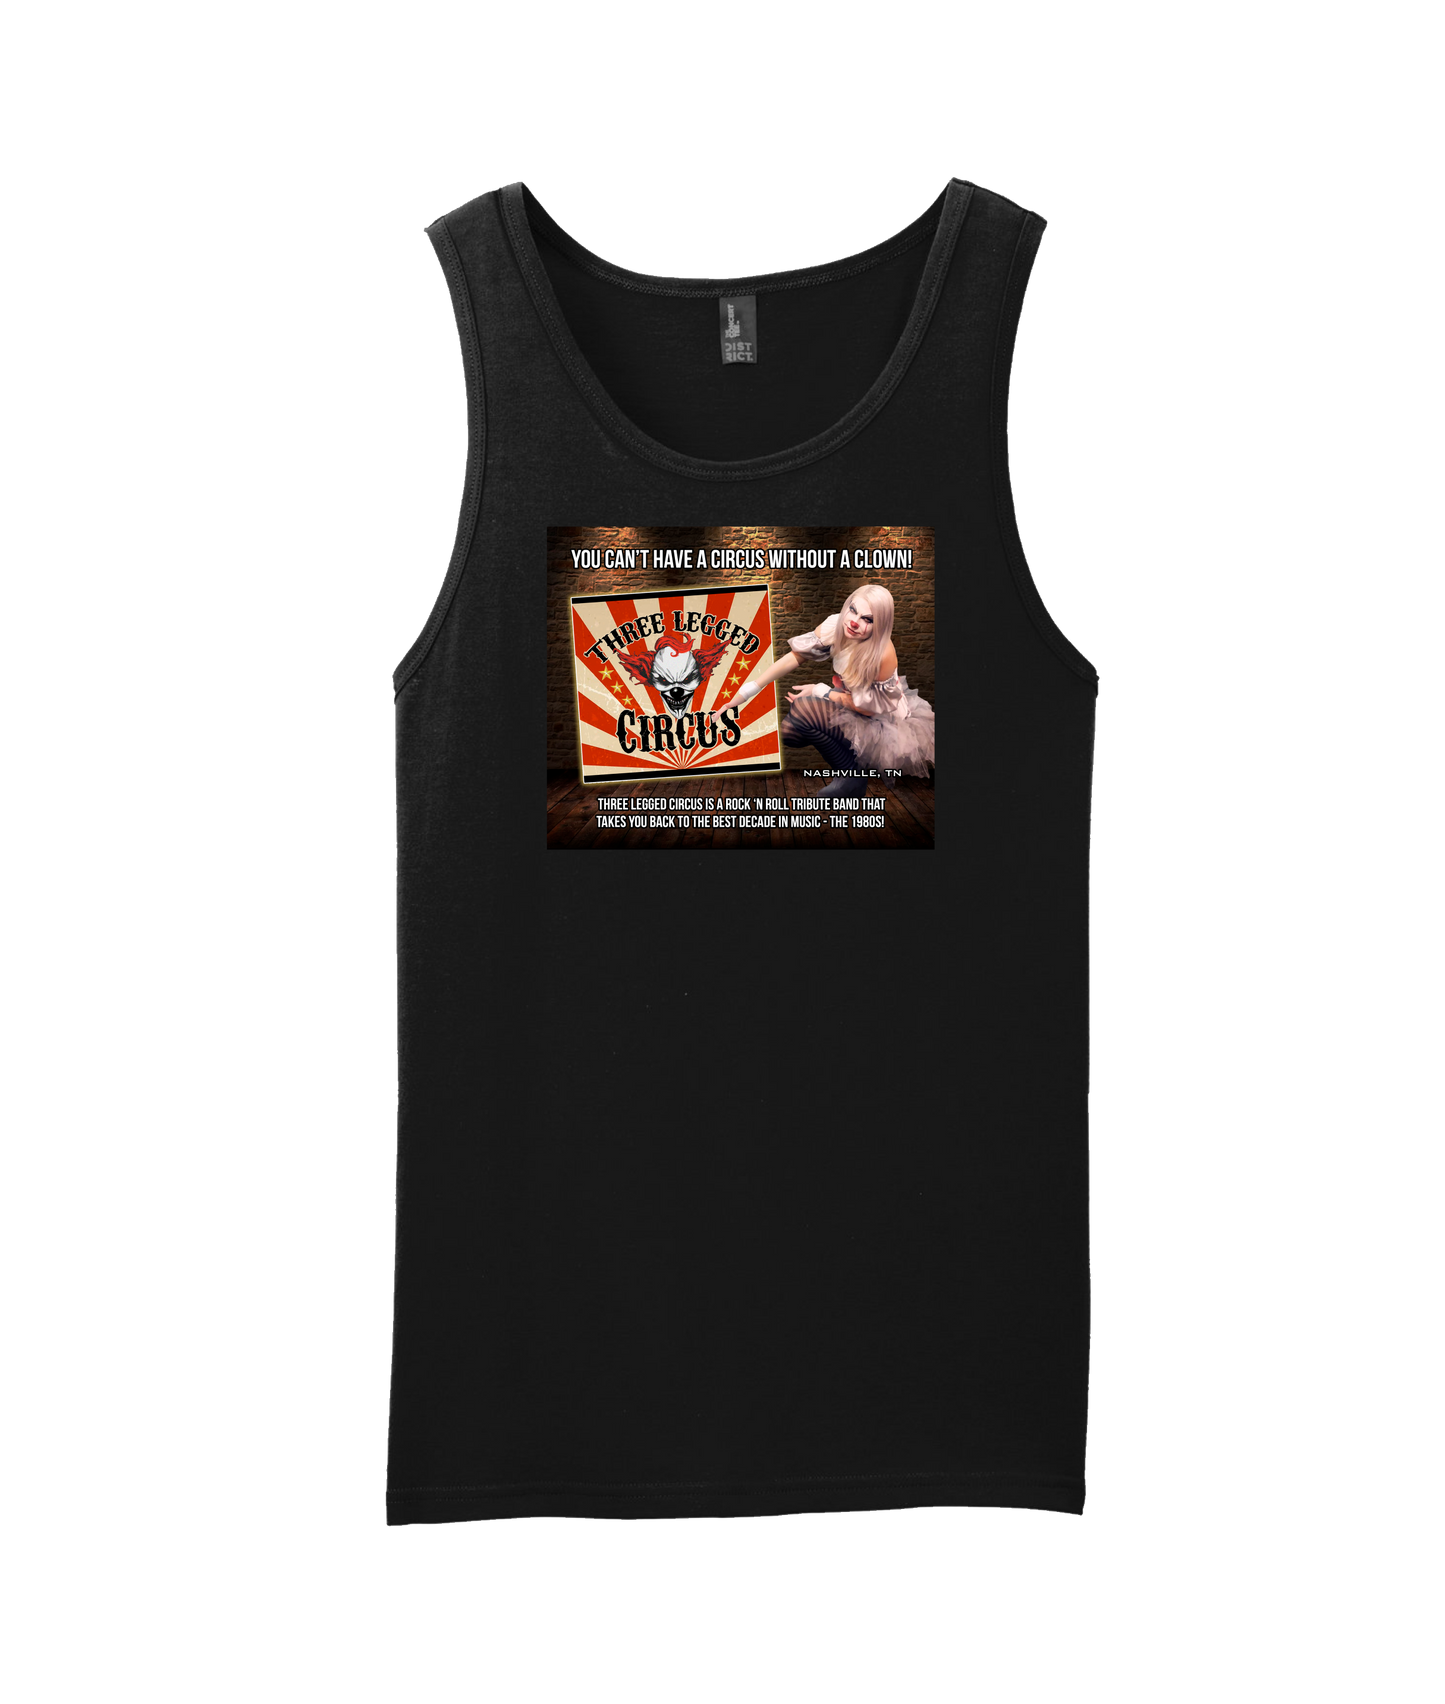 Three Legged Circus - Can't Have a Circus Without a Clown - Black Tank Top